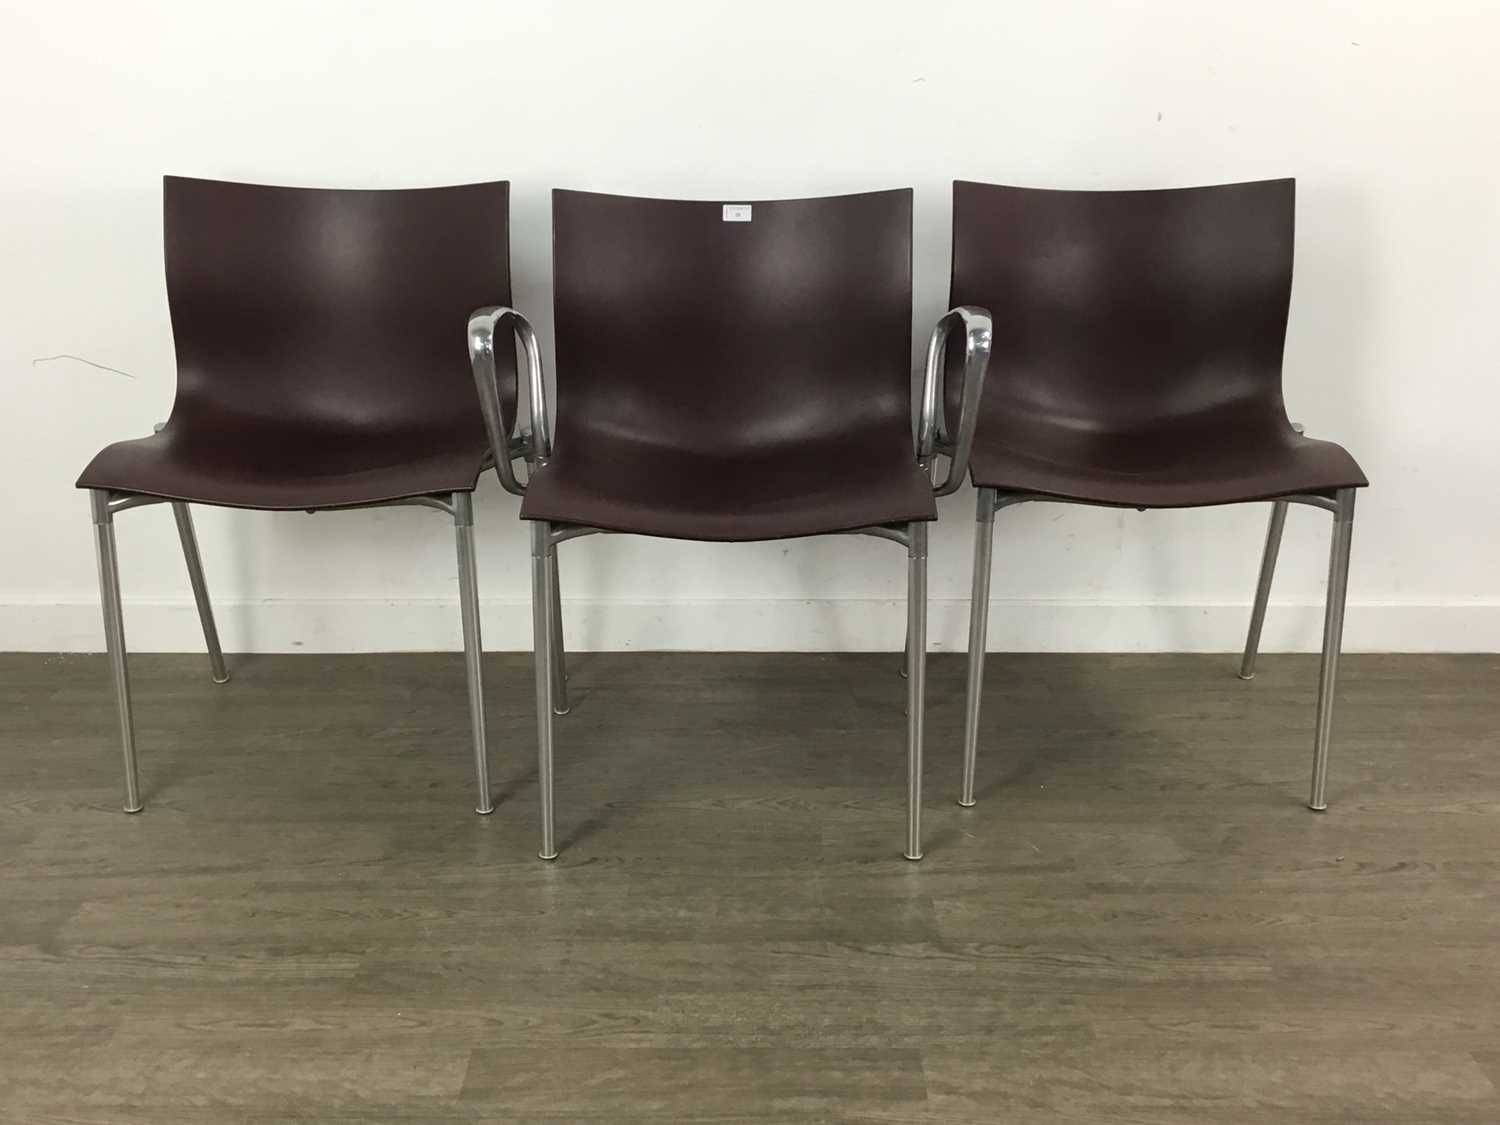 Lot 20 - PHILIPPE STARCK (FRENCH, 1949-) FOR DRIADE, SET OF SIX CAMELEON DINING CHAIRS